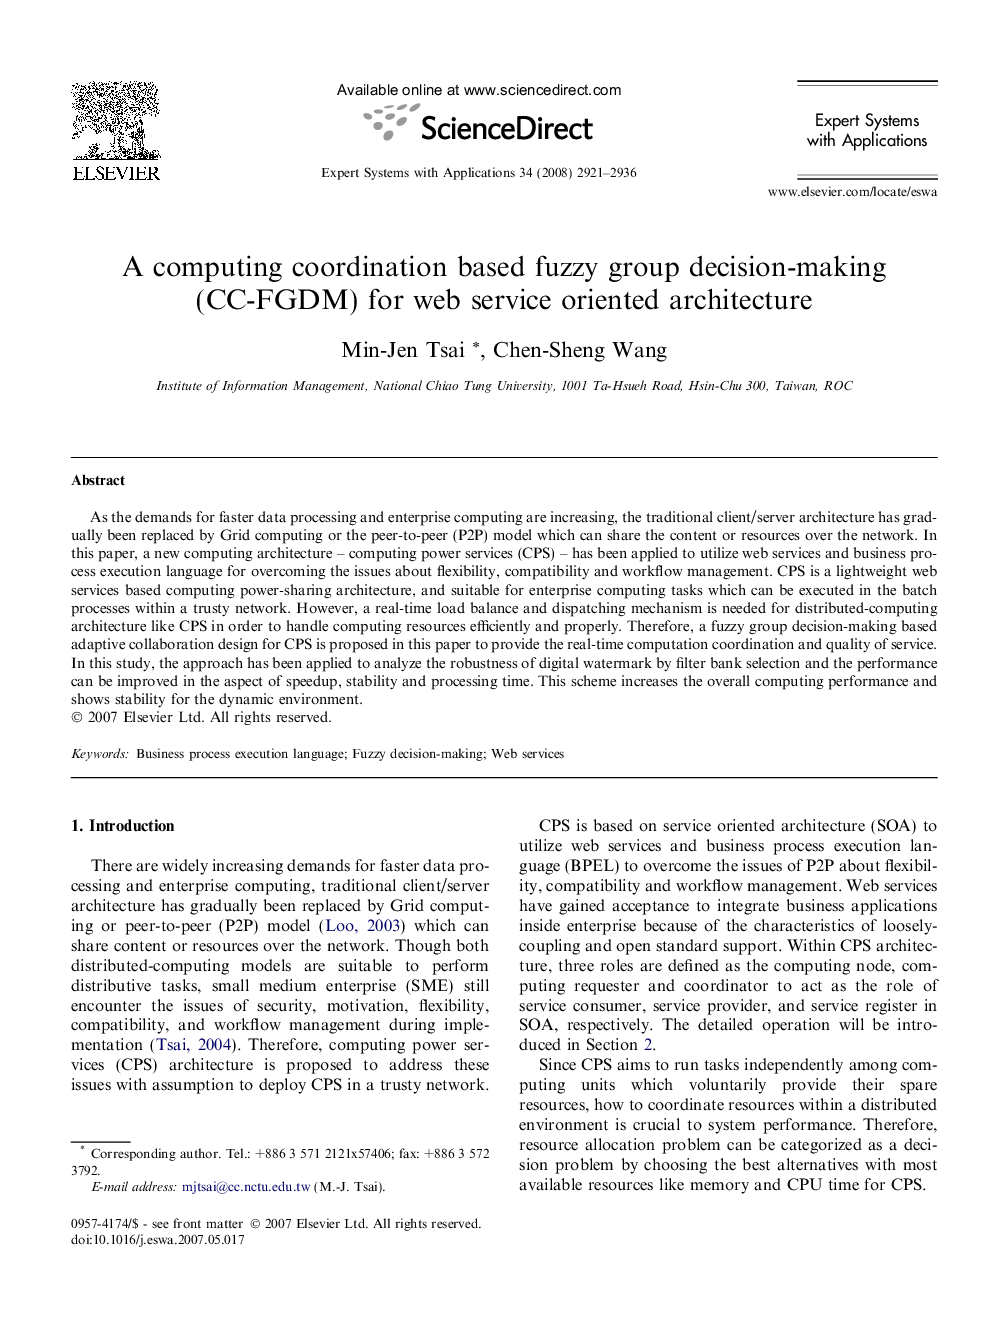 A computing coordination based fuzzy group decision-making (CC-FGDM) for web service oriented architecture